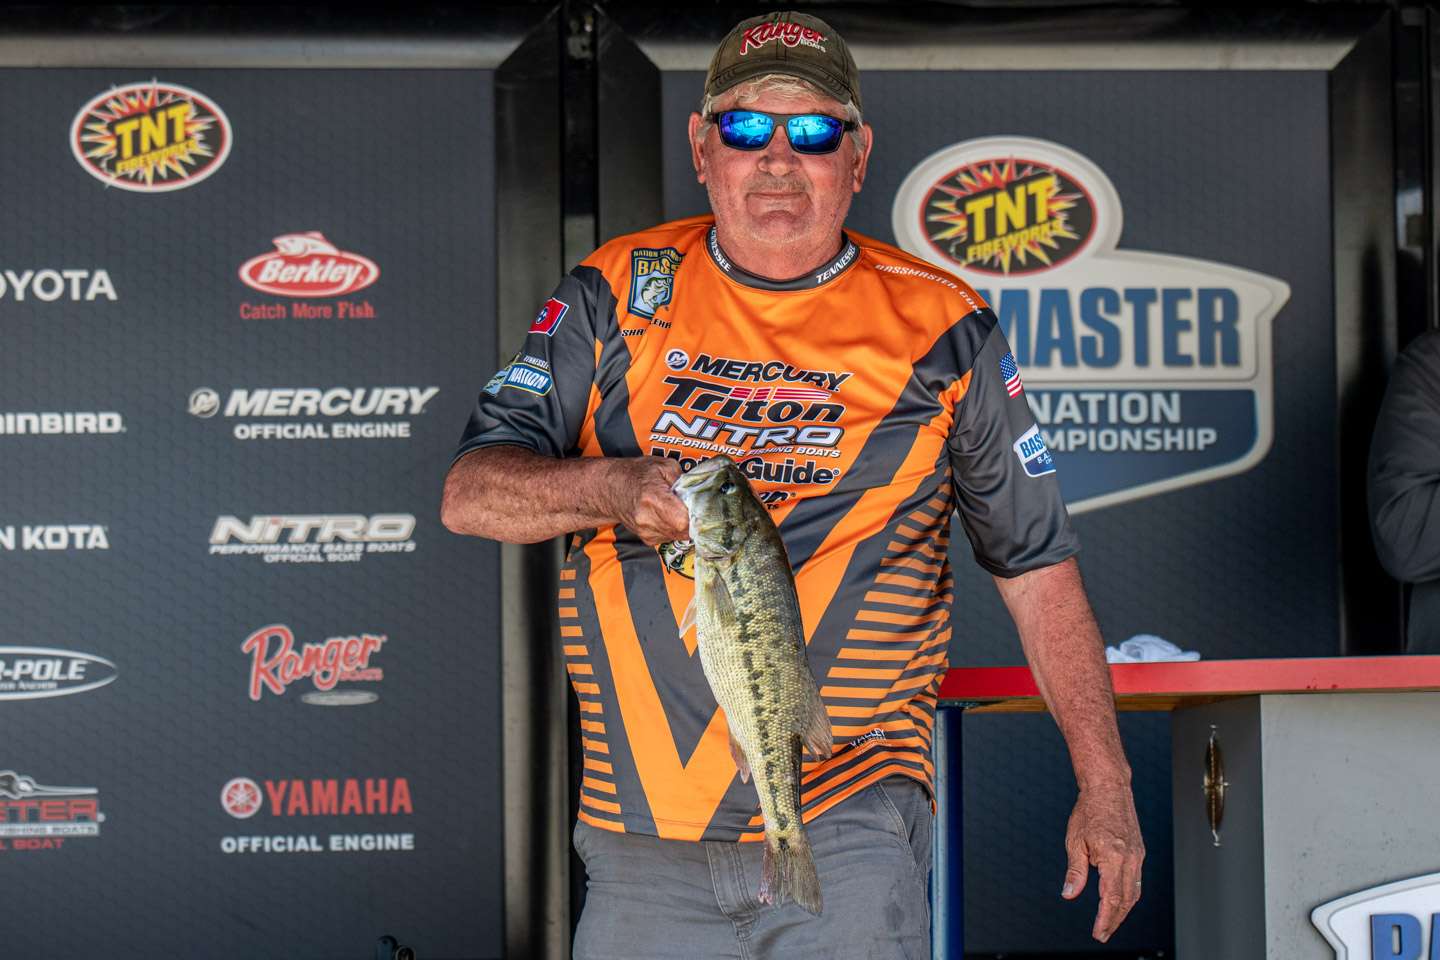 Shawn Lehr, co-angler, Tennessee (7th, 6 - 11)